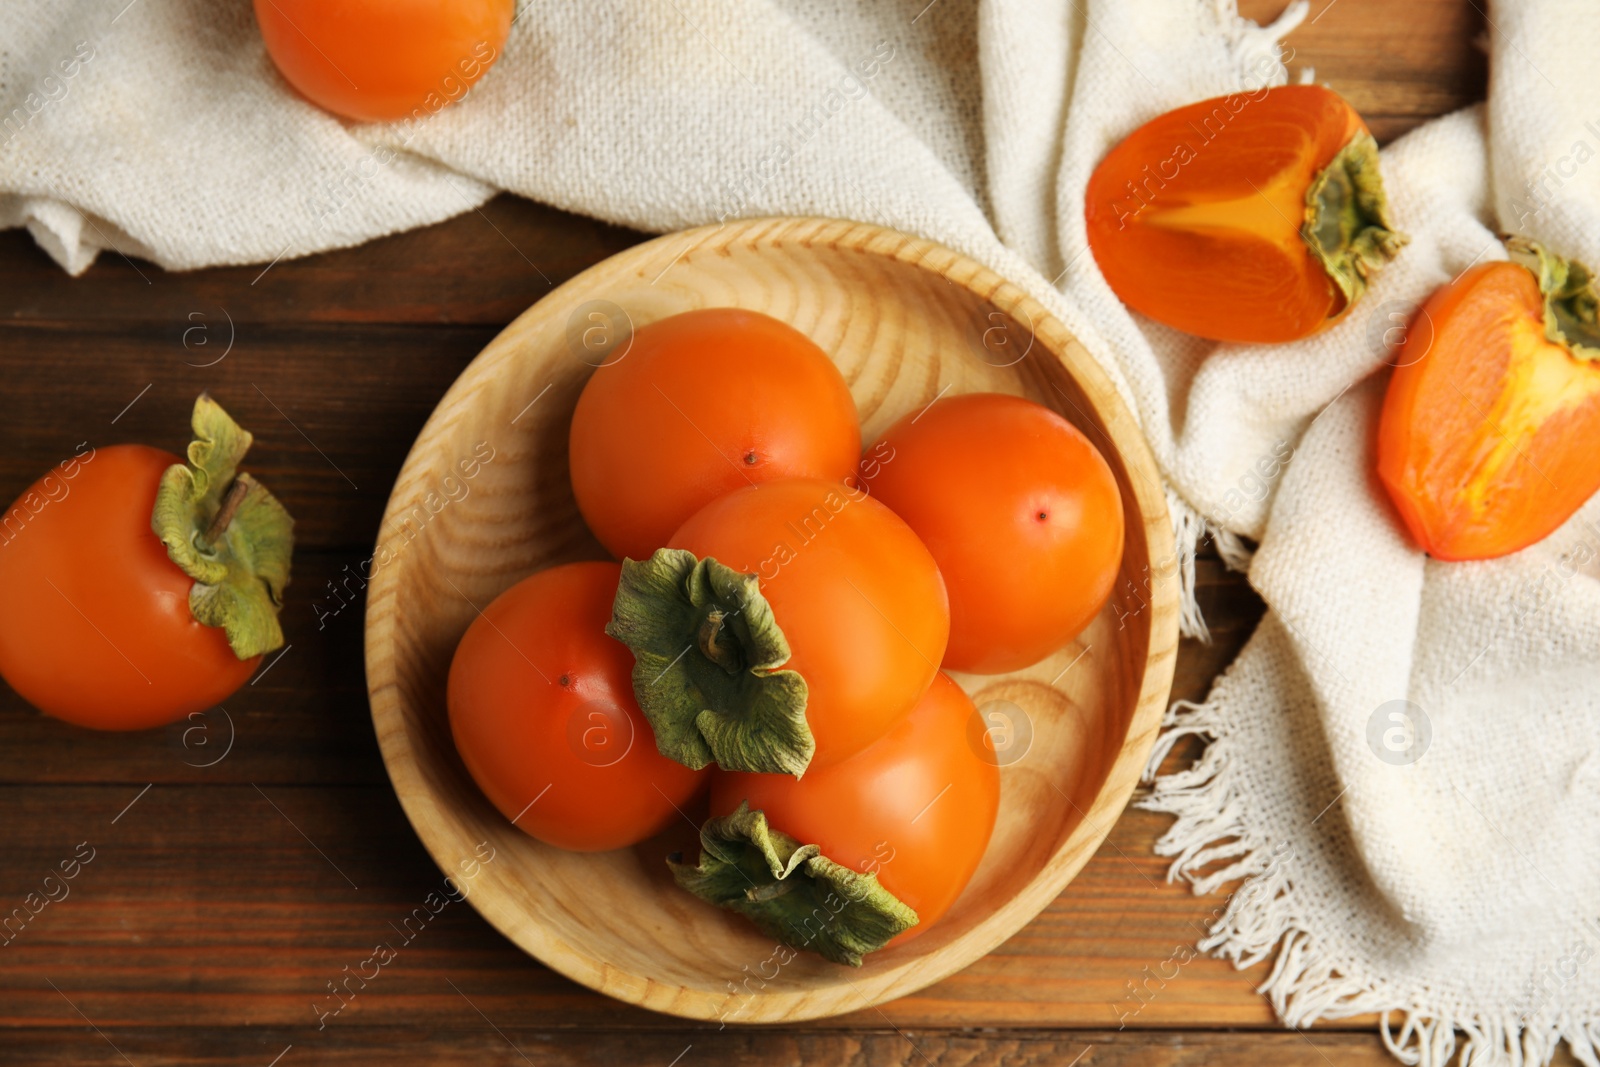 Photo of Tasty ripe persimmons on wooden table, flat lay